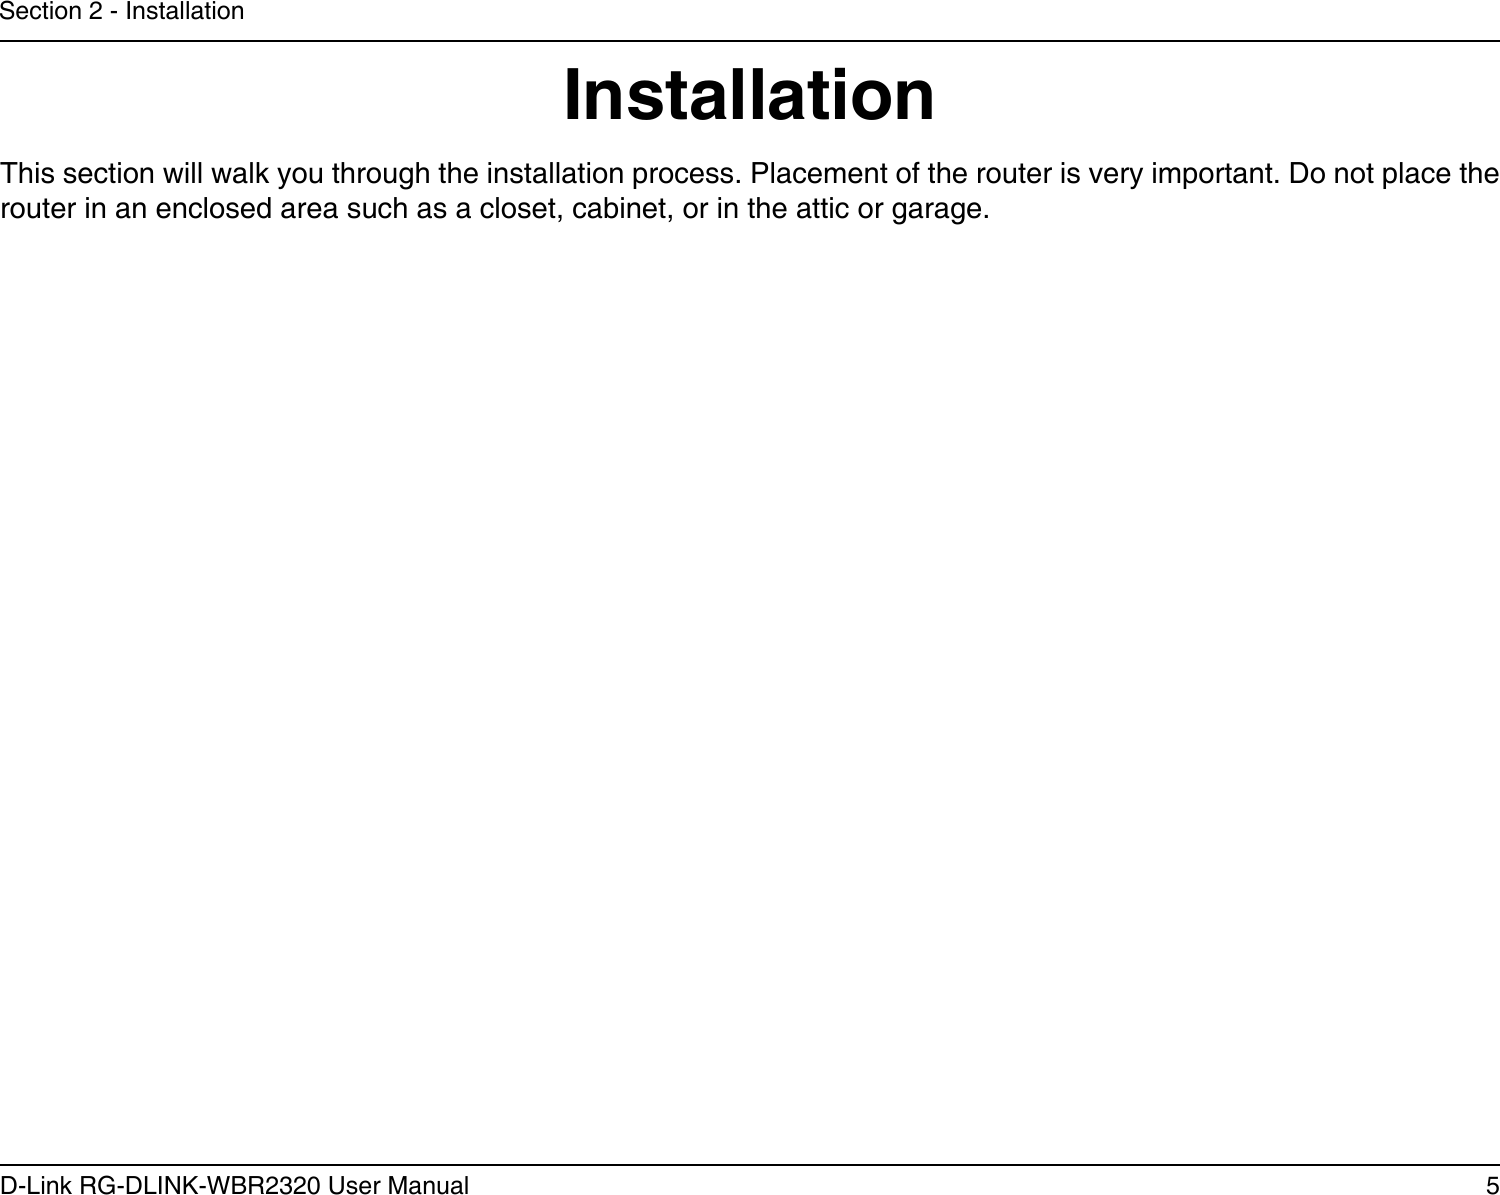 5D-Link RG-DLINK-WBR2320 User ManualSection 2 - InstallationInstallationThis section will walk you through the installation process. Placement of the router is very important. Do not place the router in an enclosed area such as a closet, cabinet, or in the attic or garage. 